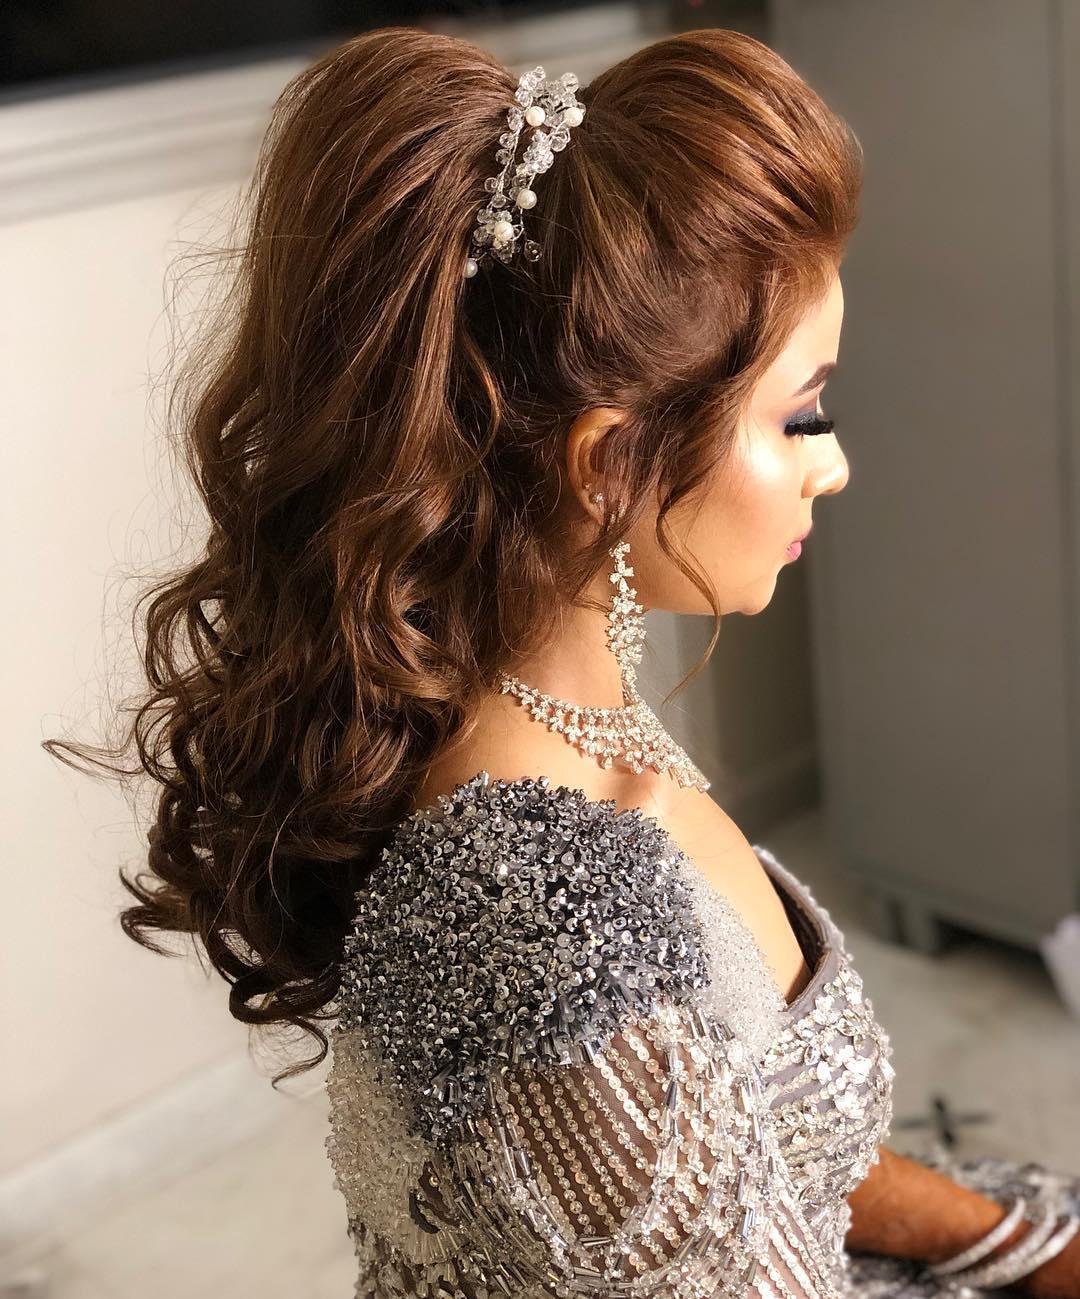 16 Best Wedding Hairstyles for Short and Long Hair 2018 - Romantic Bridal Hair  Ideas